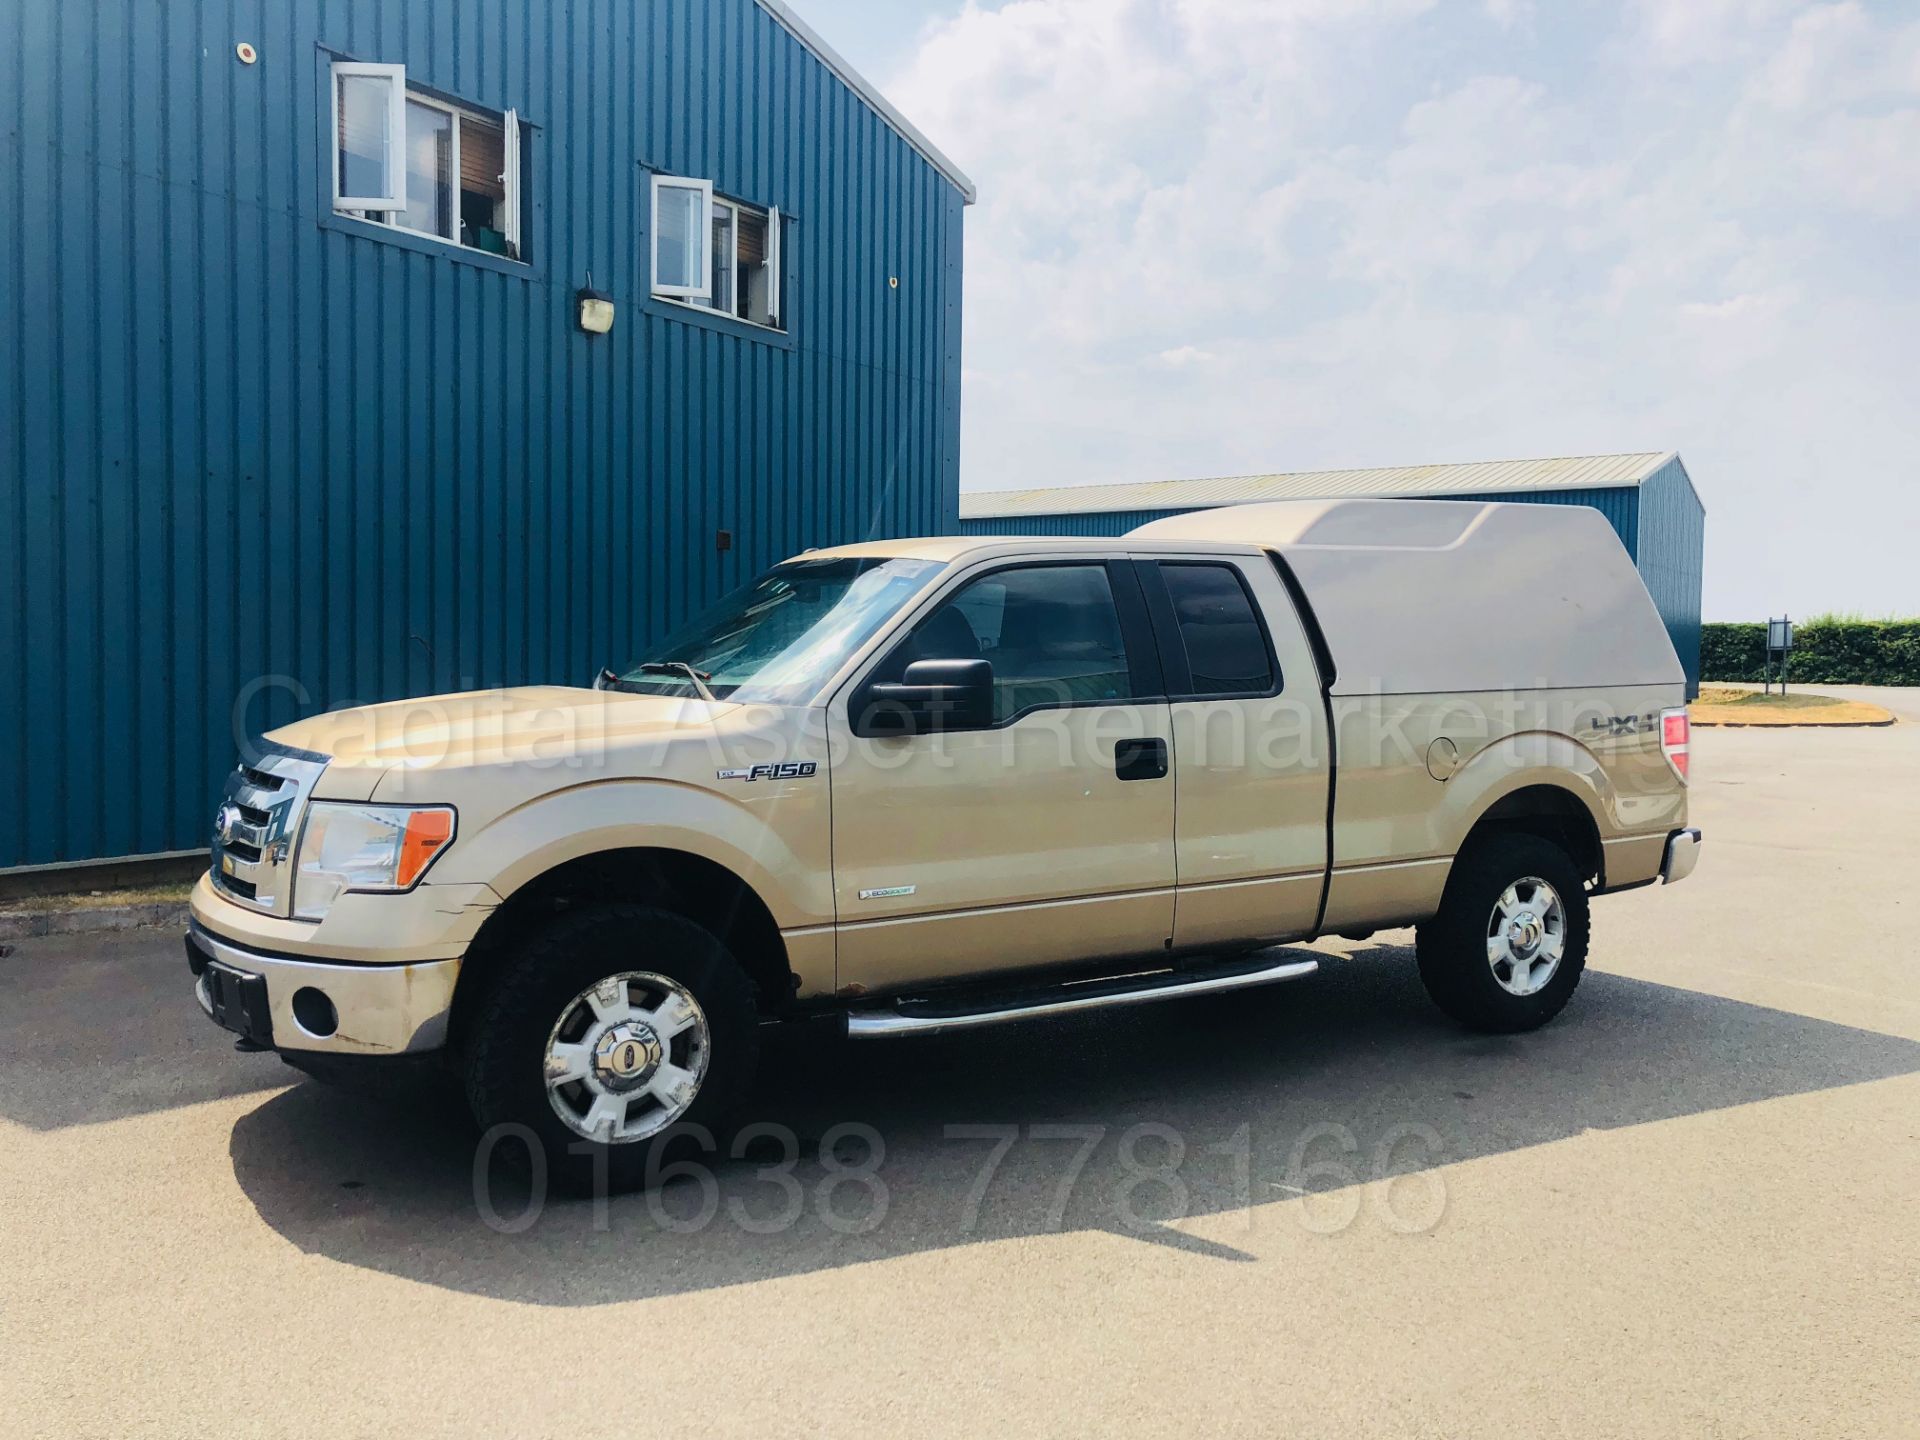 (On Sale) FORD F-150 5.4 V8 XLT EDITION KING-CAB (2012) MODEL**4X4**6 SEATER**AUTOMATIC *TOP SPEC* - Image 19 of 52